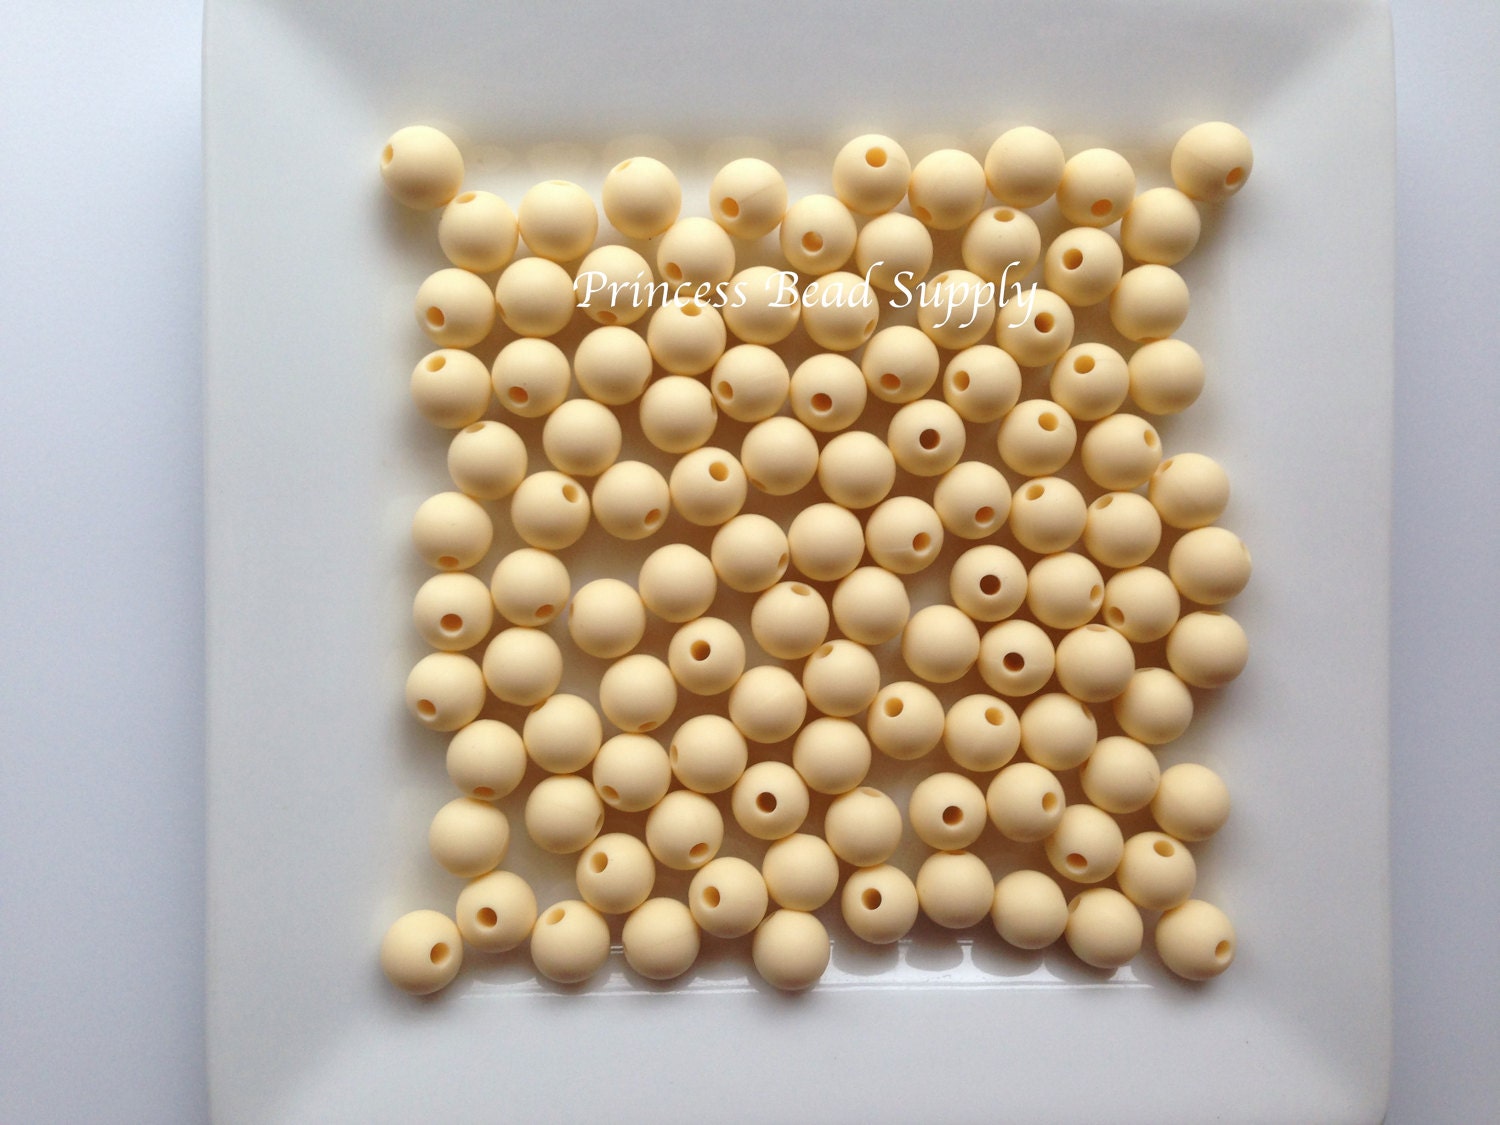 500 BULK 15mm Silicone Beads, 500 Silicone Beads Wholesale, 100